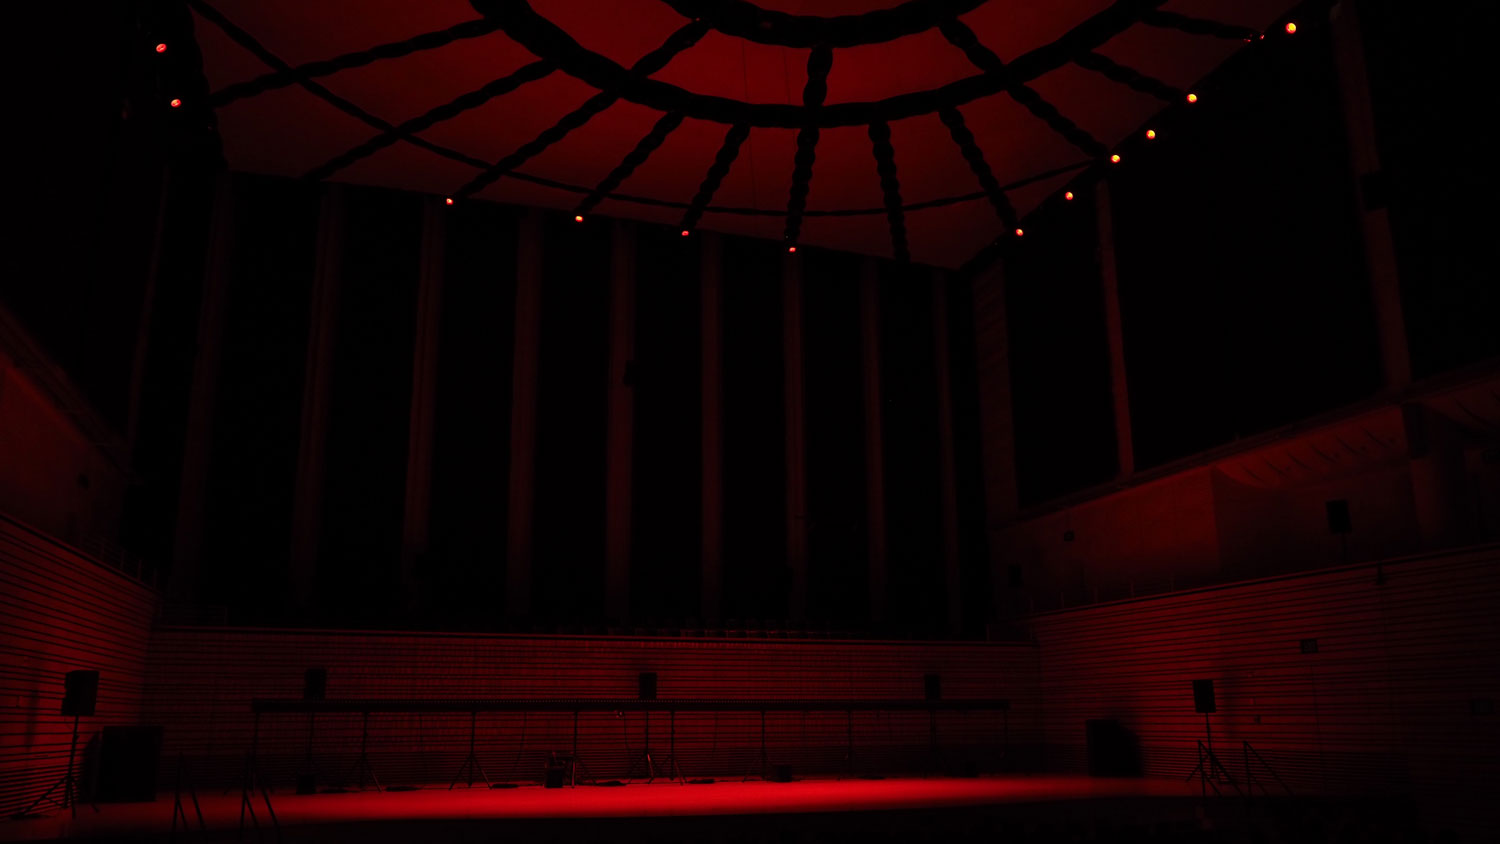 The empty concert hall bathed in deep red light. 